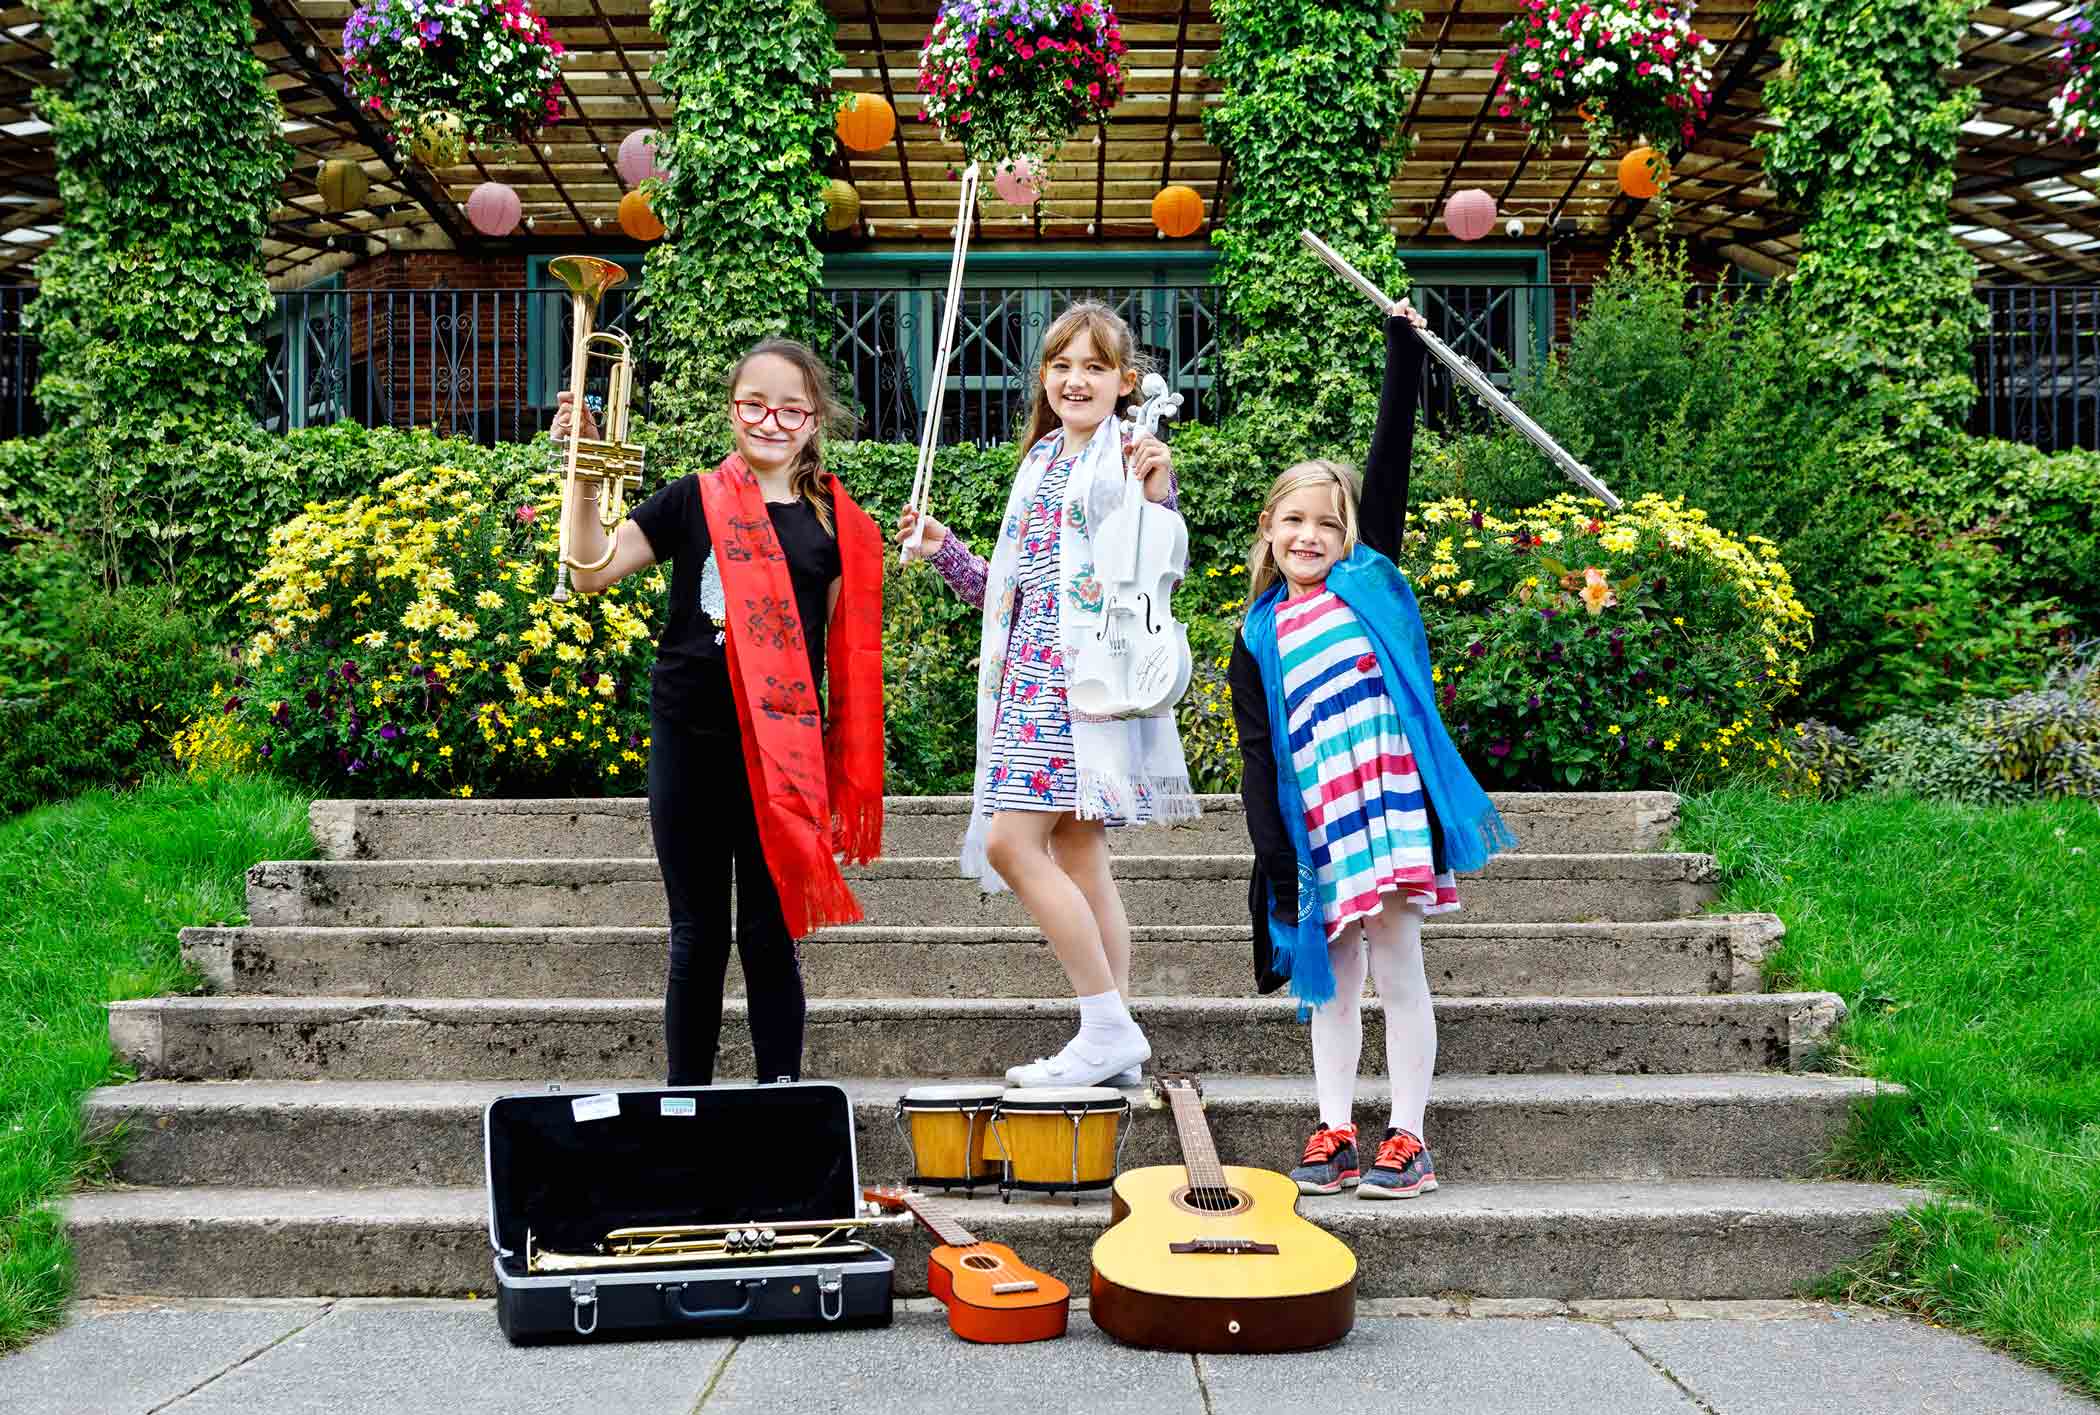 Local children in Harrogate’s Valley Gardens with Sam Smith’s violin and a selection of other instruments from the Ronnie Scott Foundation’s 2019 amnesty. Left to right: Mercedes Wilson, Jessica Hepworth, Sophie Hepworth